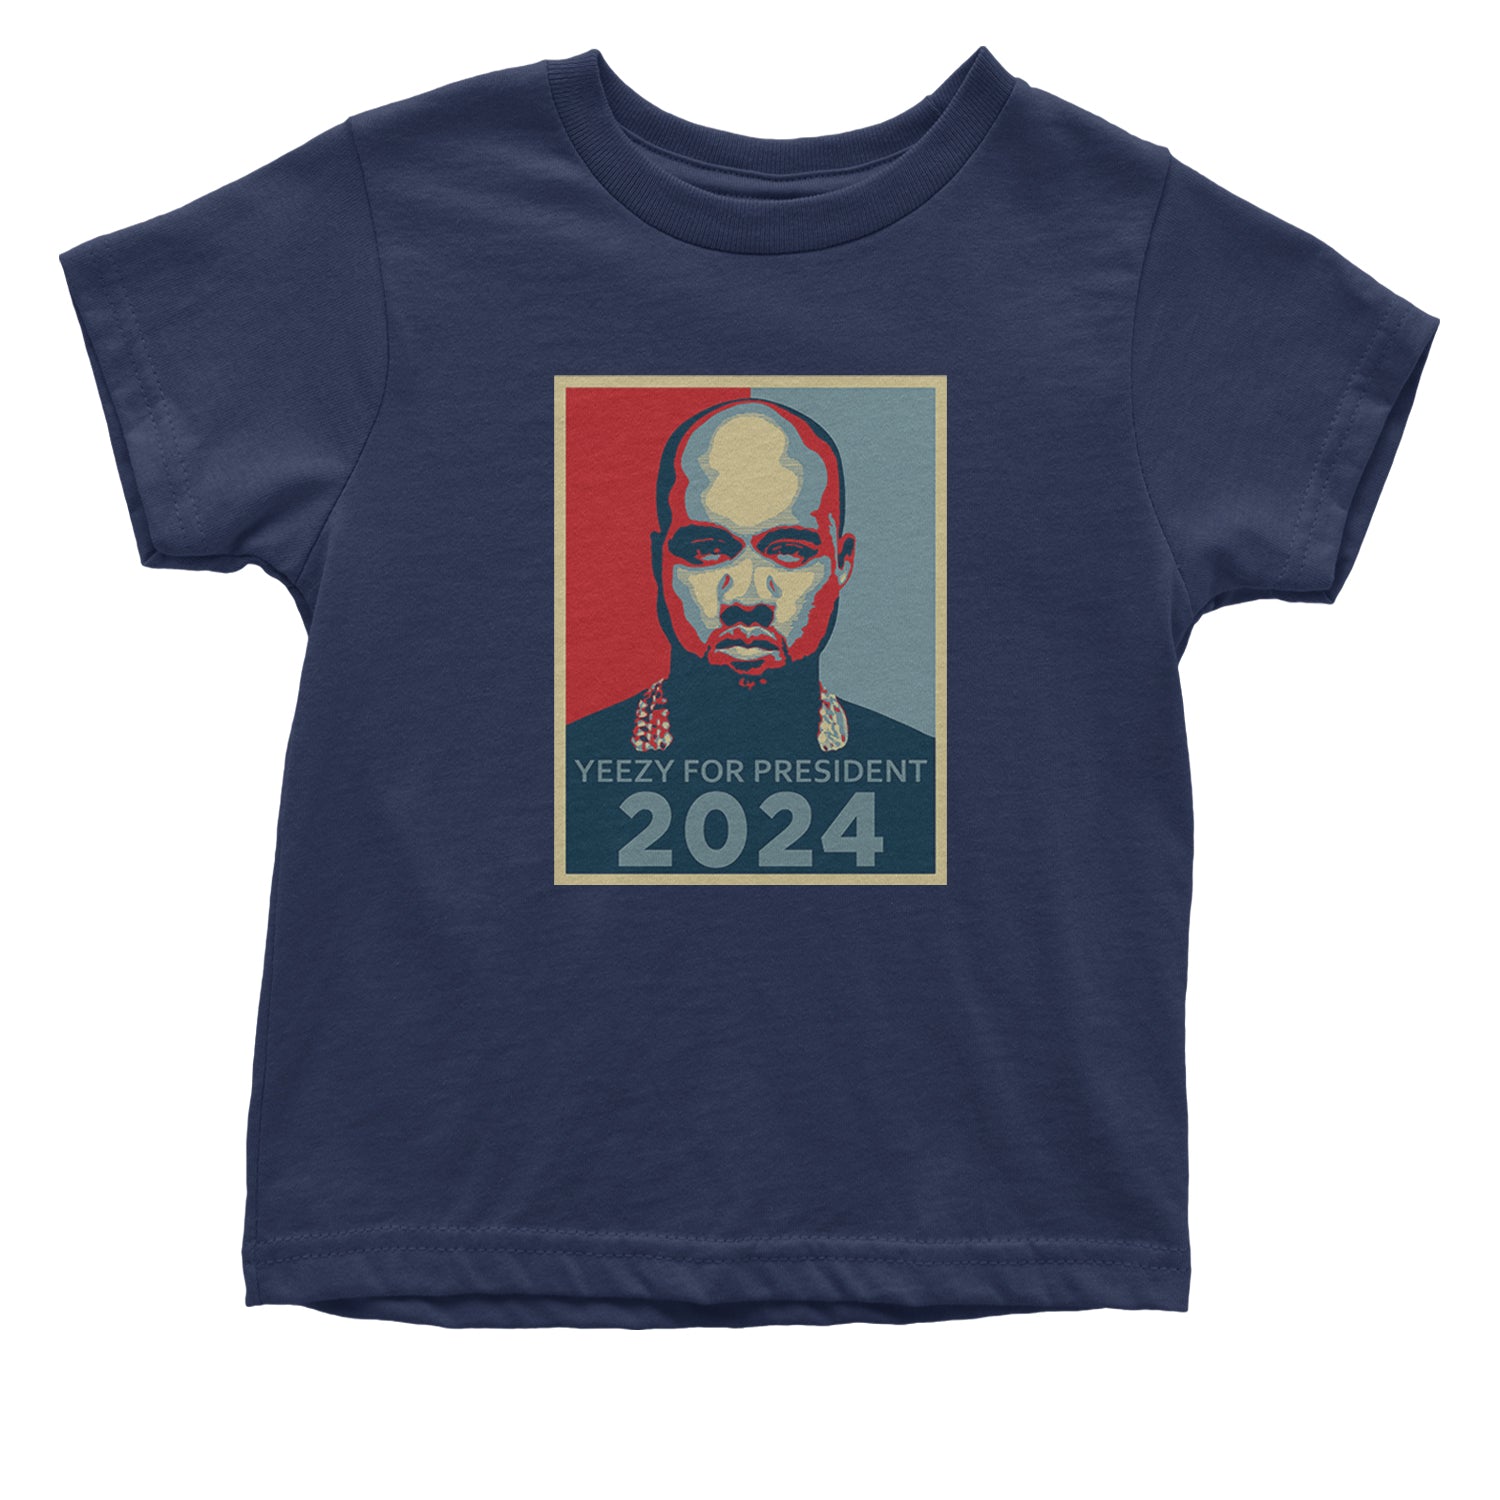 Yeezus For President Vote for Ye Infant One-Piece Romper Bodysuit and Toddler T-shirt Navy Blue